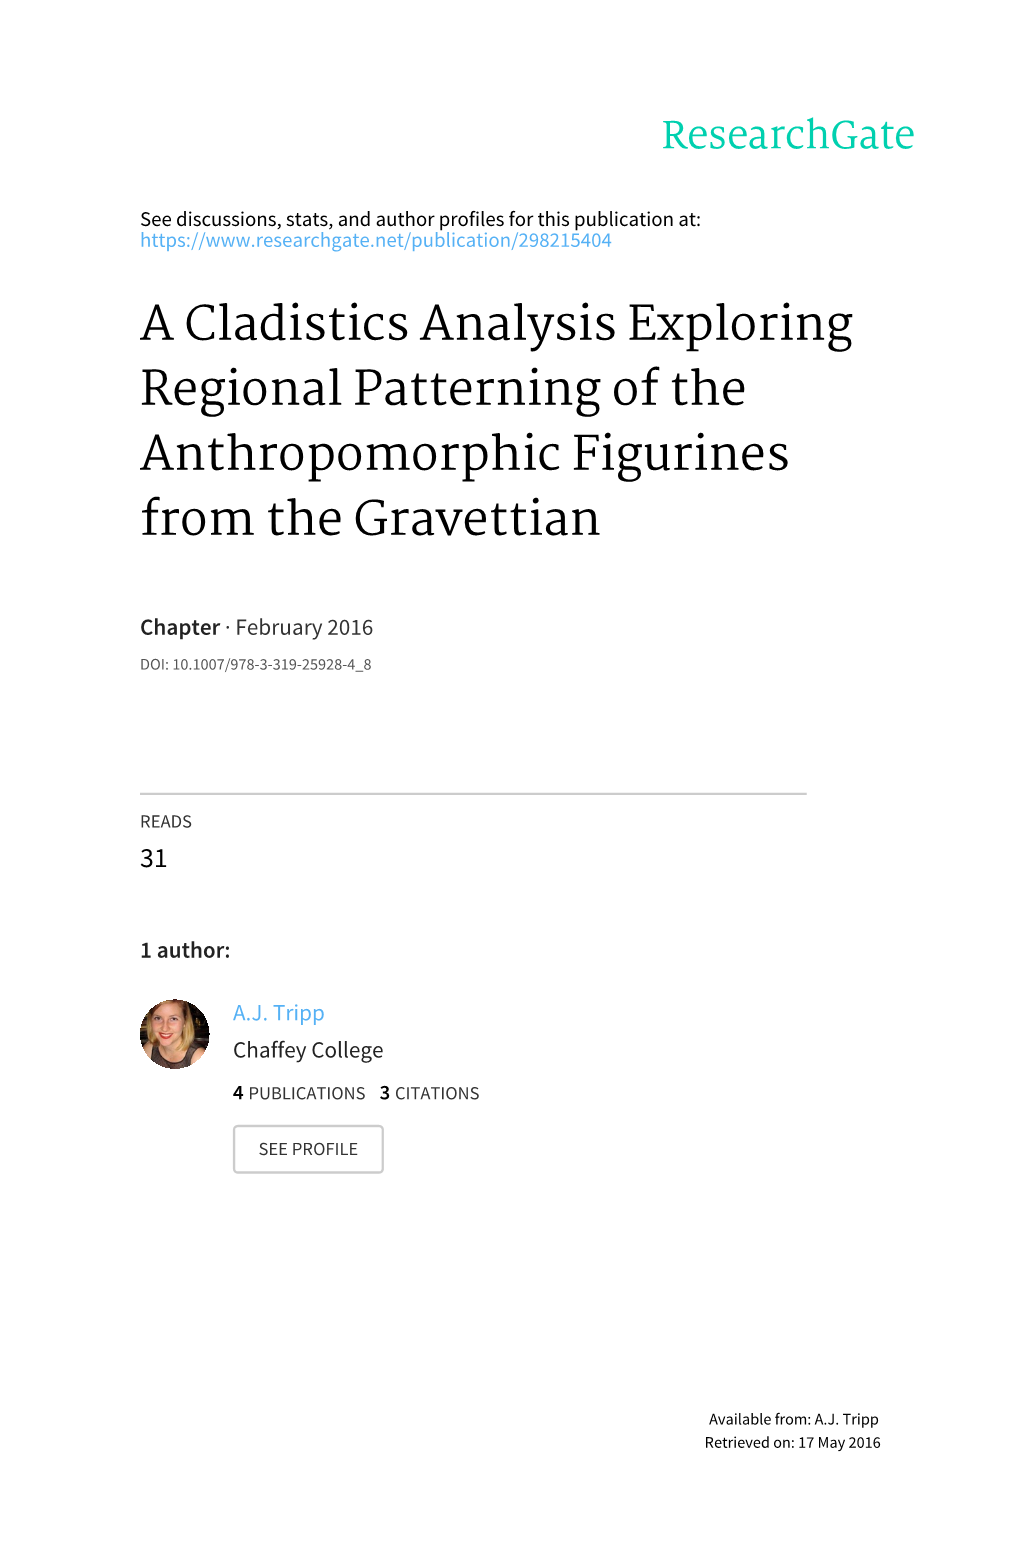 A Cladistics Analysis Exploring Regional Patterning of the Anthropomorphic Figurines from the Gravettian